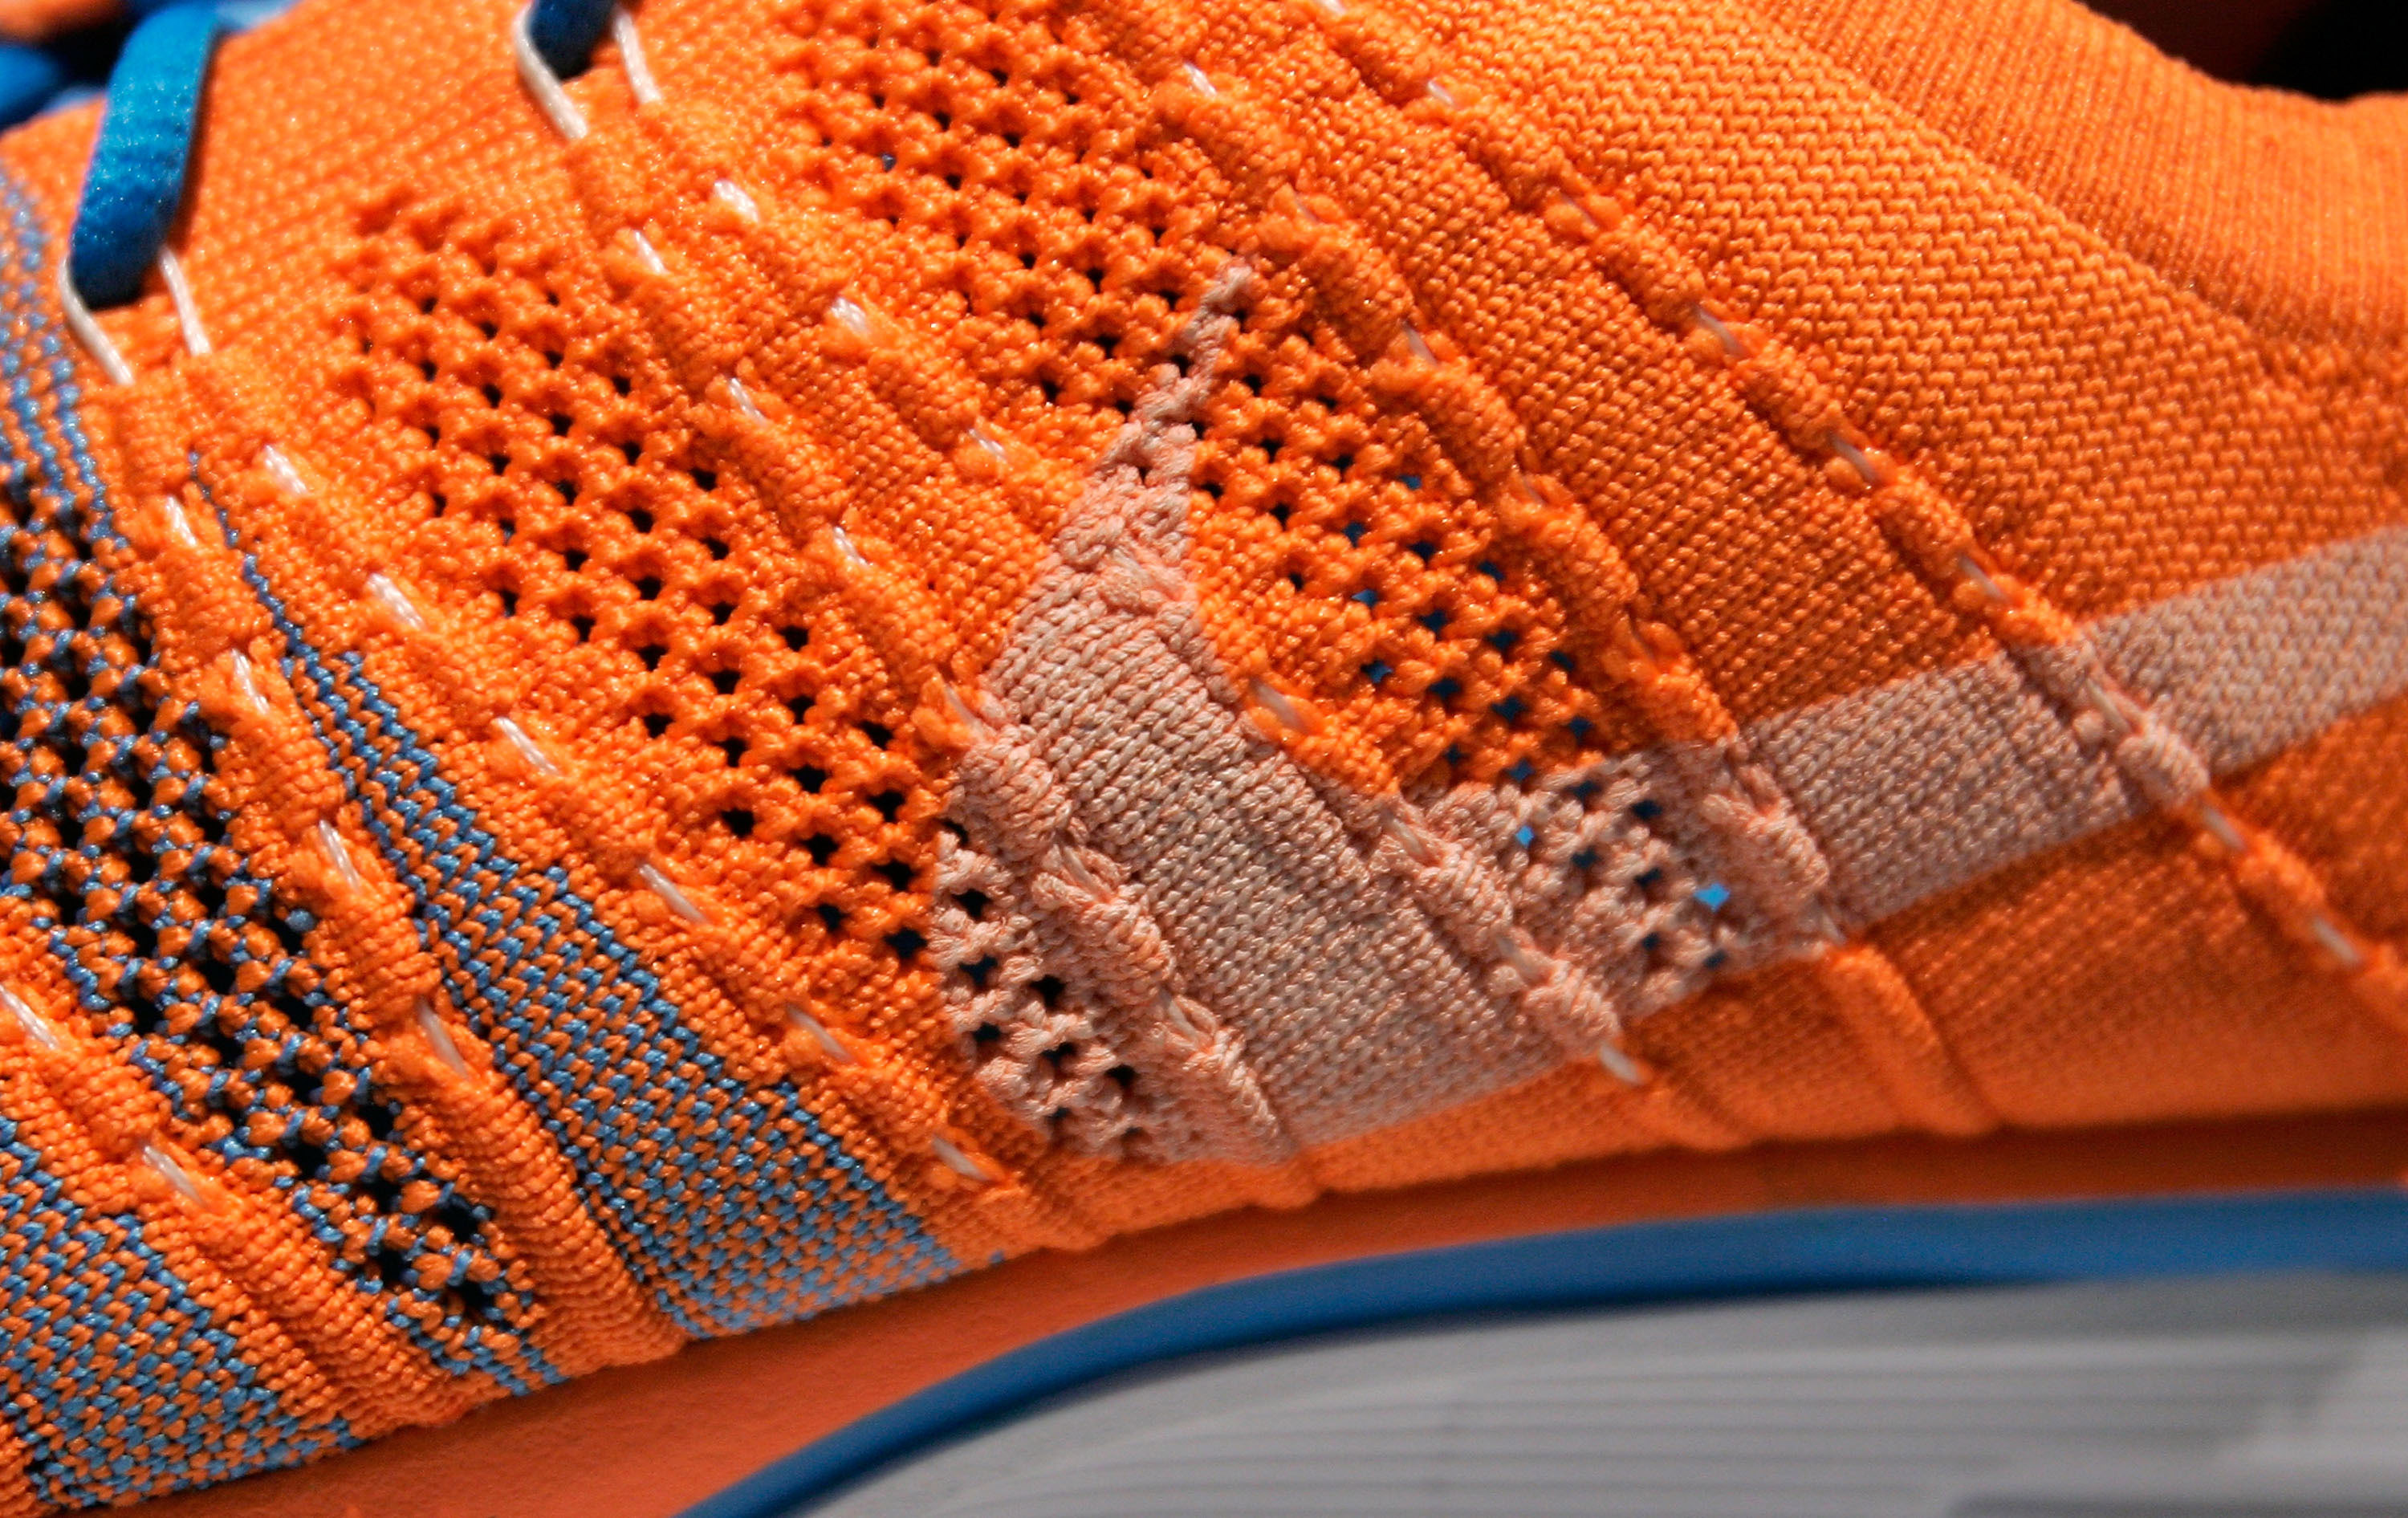 A sneaker with Nike's Flyknit technology. (Mike Lawrie&mdash;Getty Images)